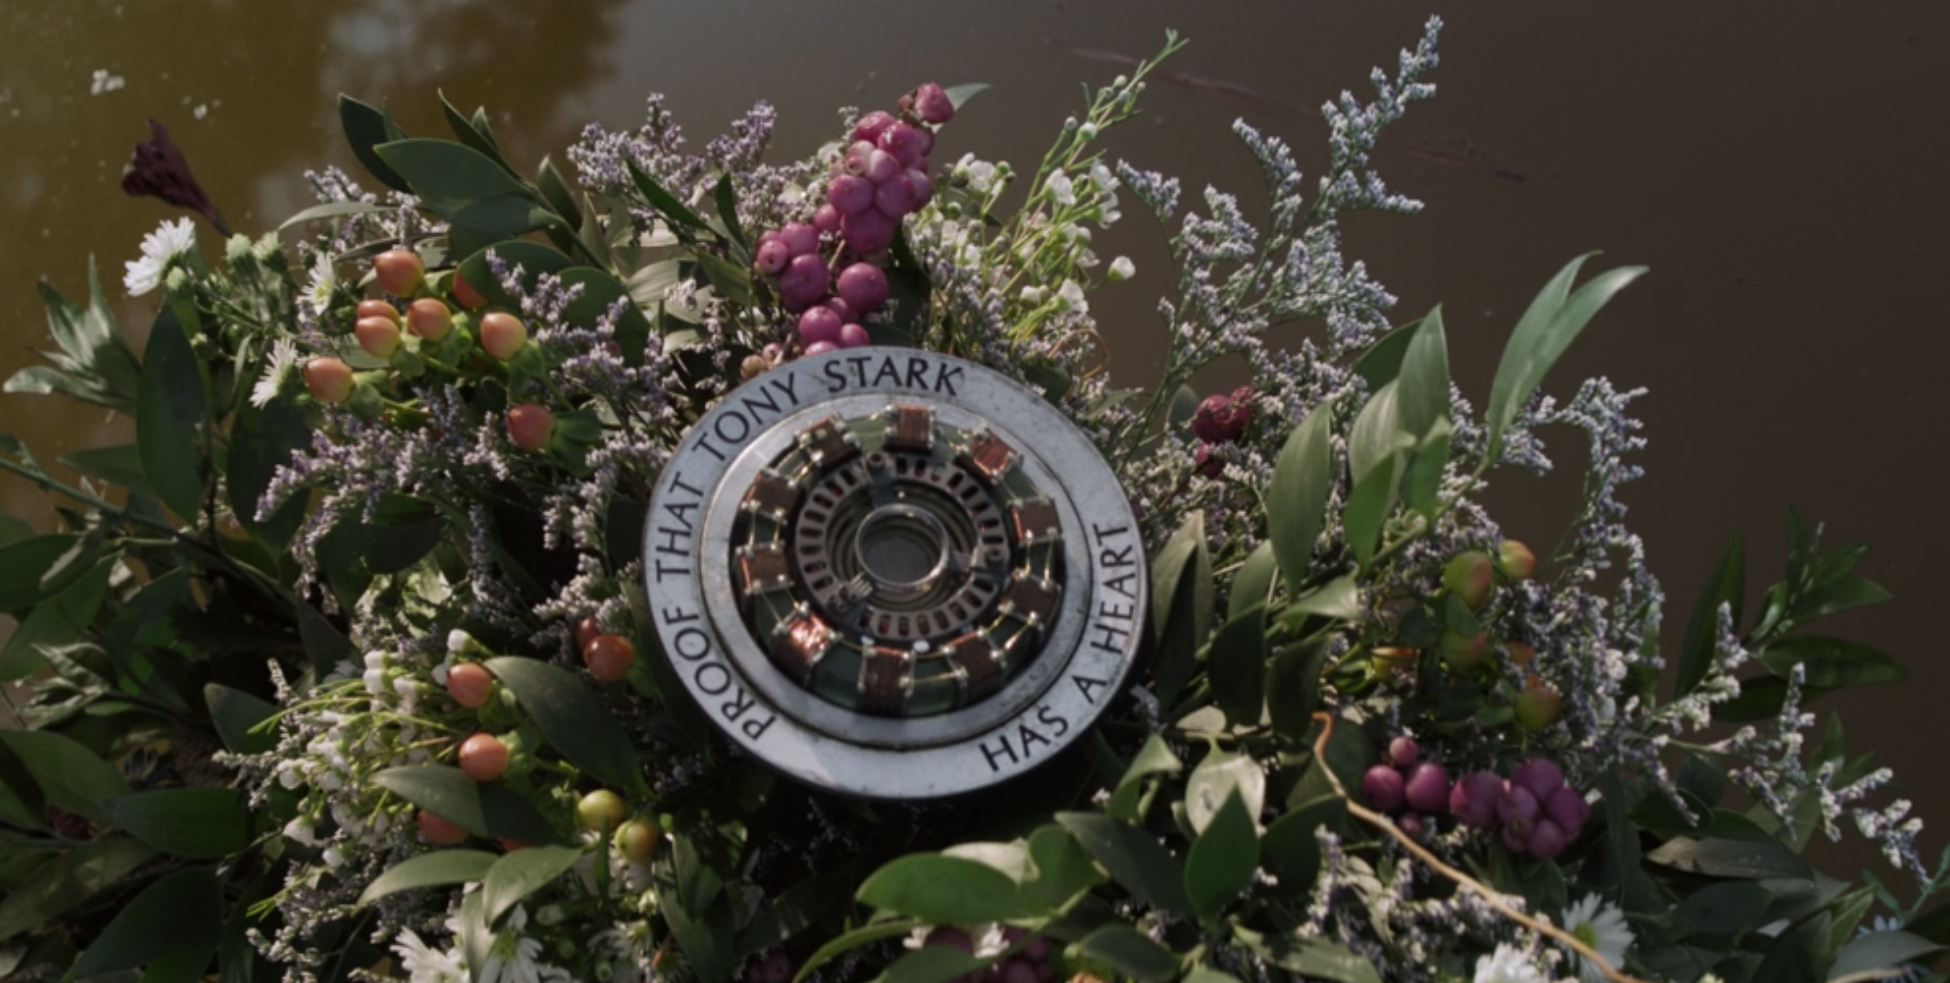 The arc reactor Tony Stark used to power his Iron Man suits floats on a lake during his funeral in the movie &quot;Avengers: Endgame.&quot;